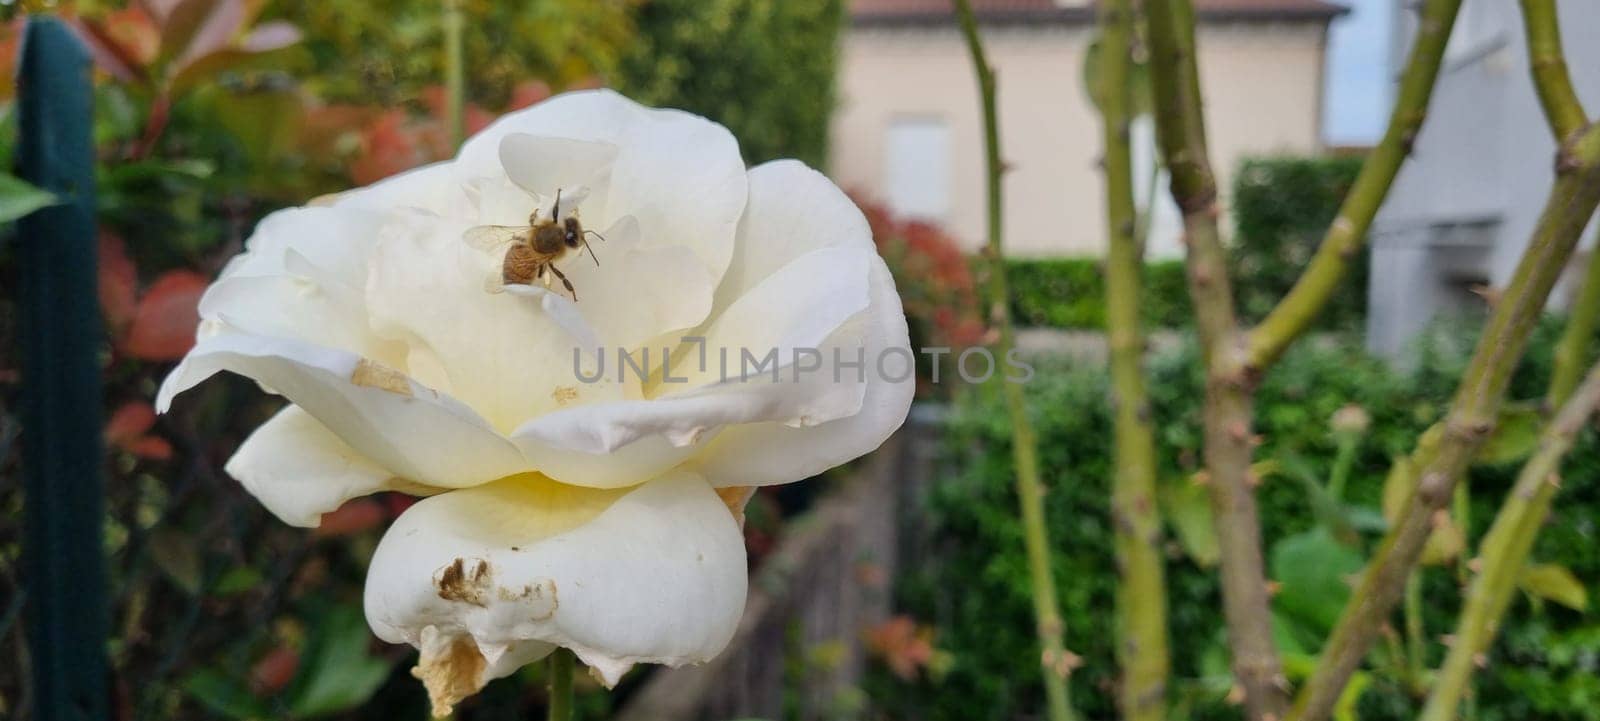 Bee gathers pollen on a white rose against a blurred garden background, showcasing nature's harmony